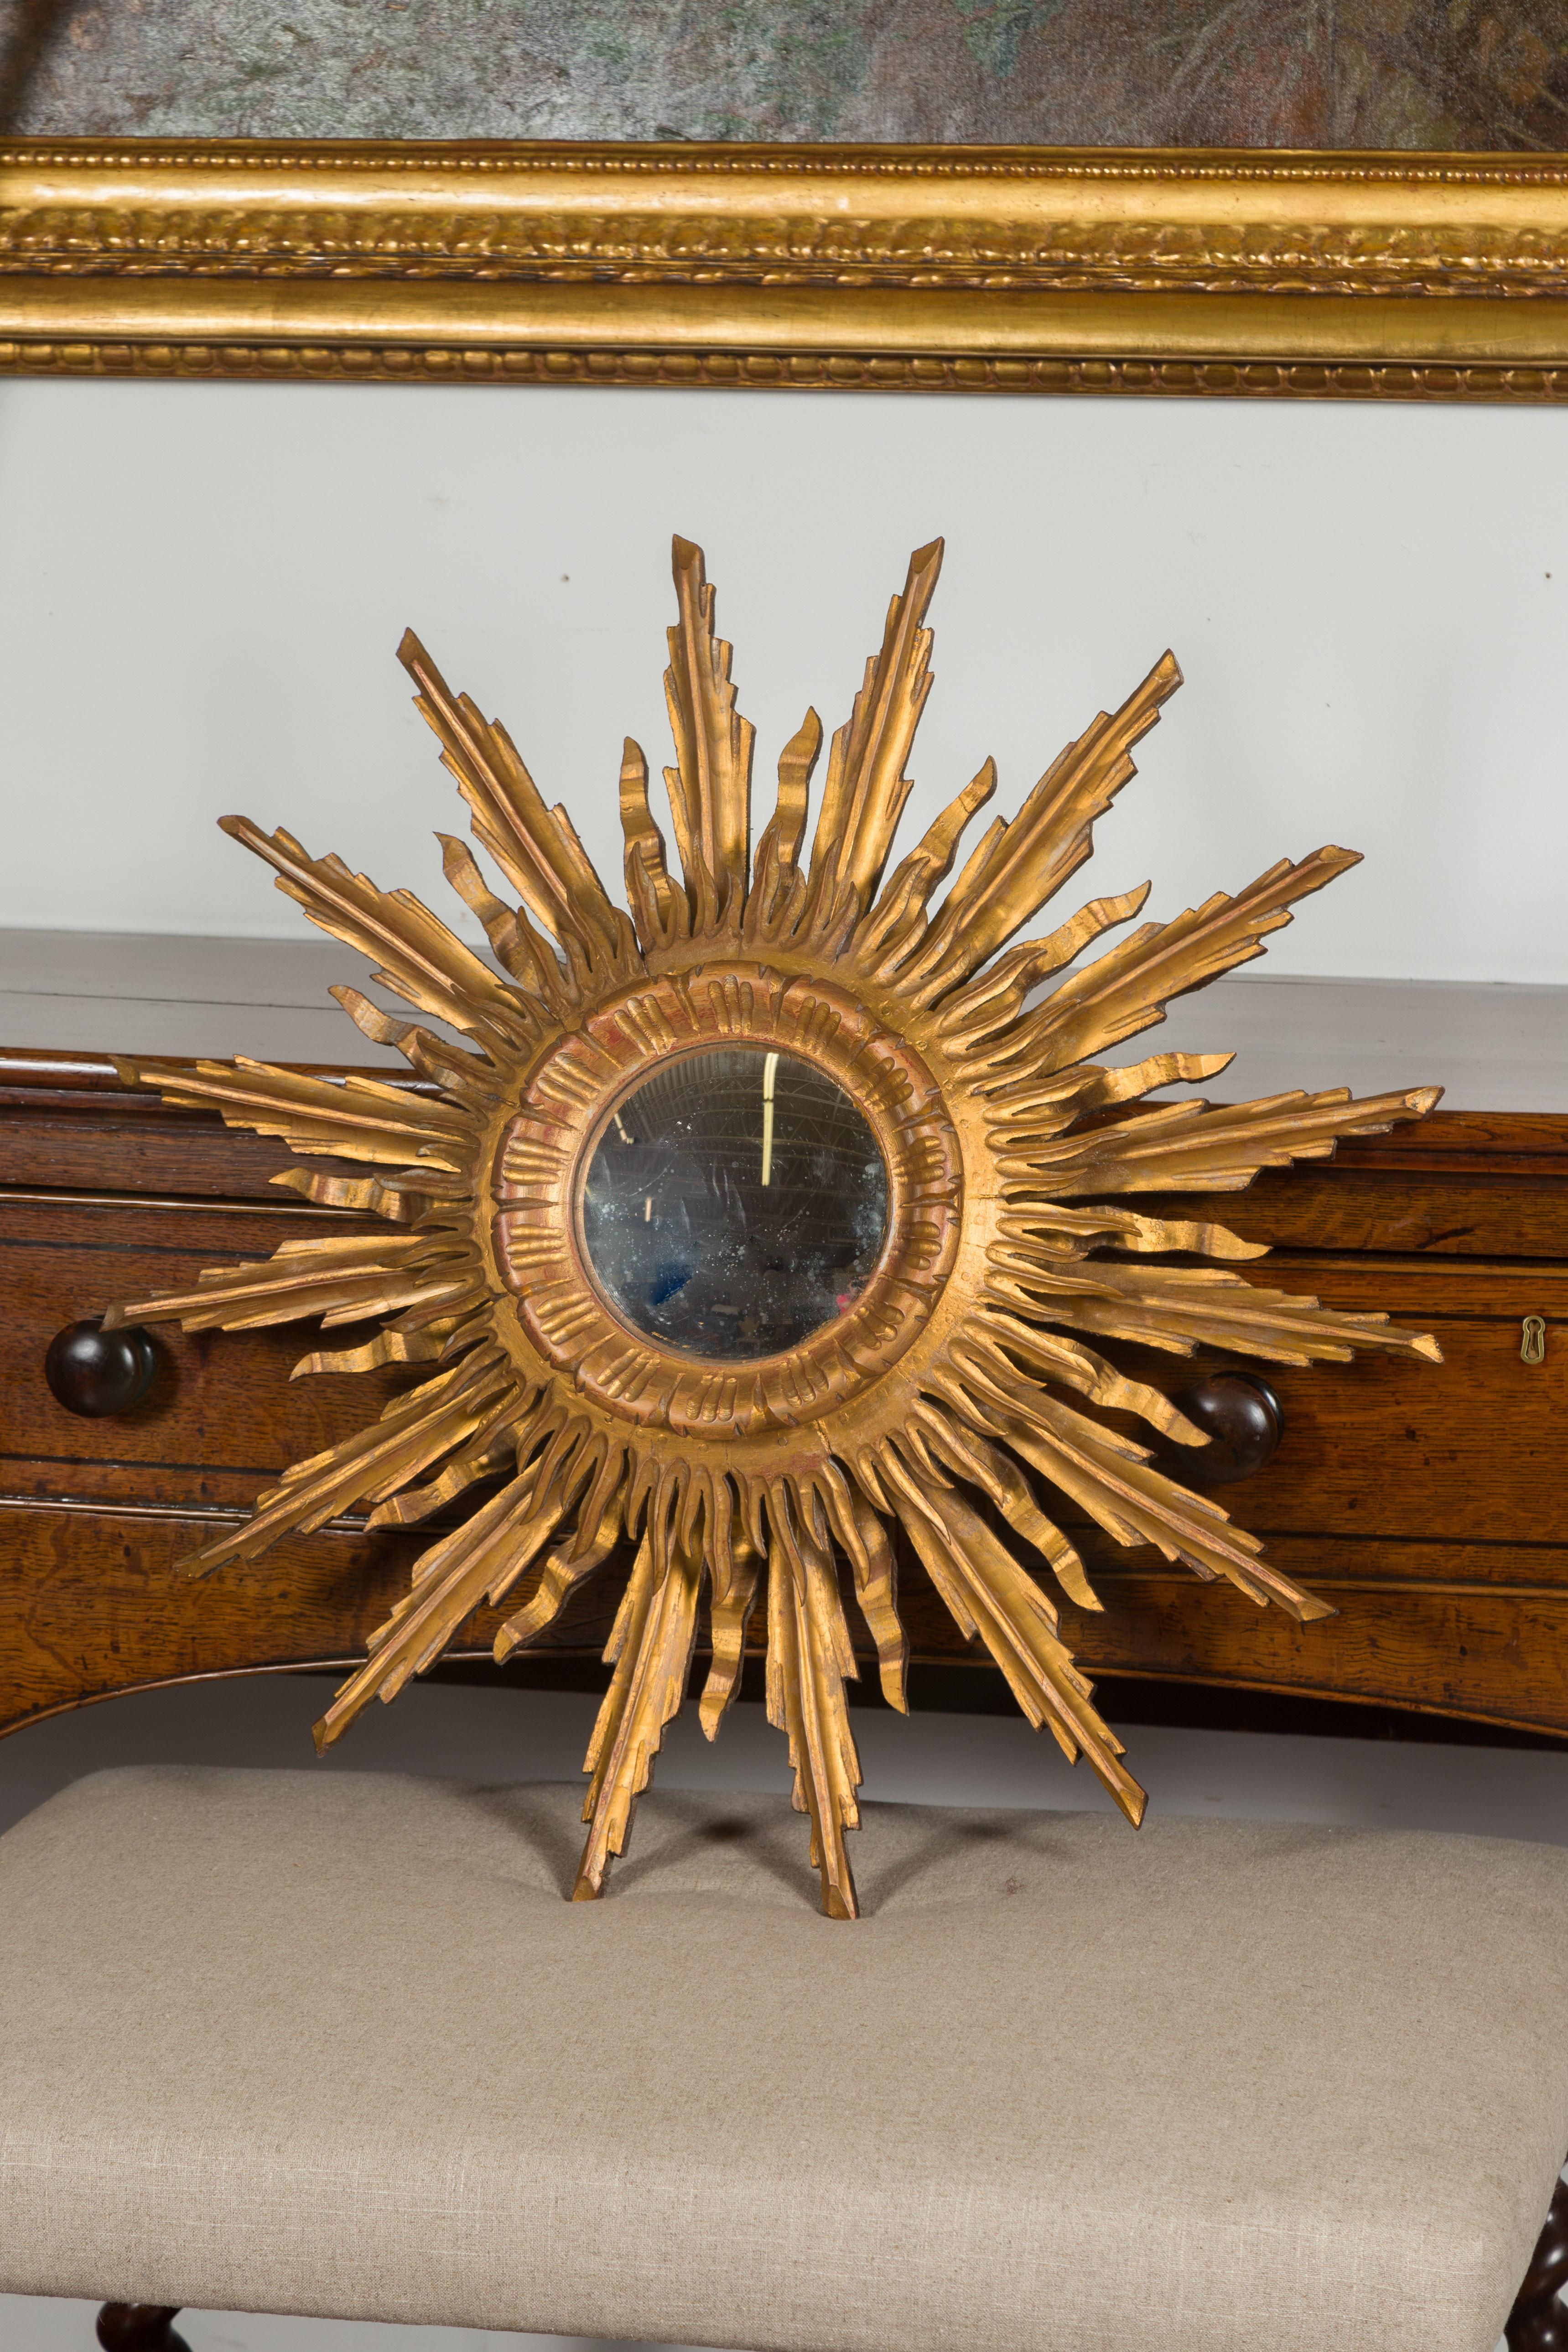 A French vintage giltwood sunburst convex mirror from the mid-20th century, with rays of varying heights. Created in France during the midcentury period, this sunburst mirror charms us with its graceful lines and golden finish. Surrounding a central